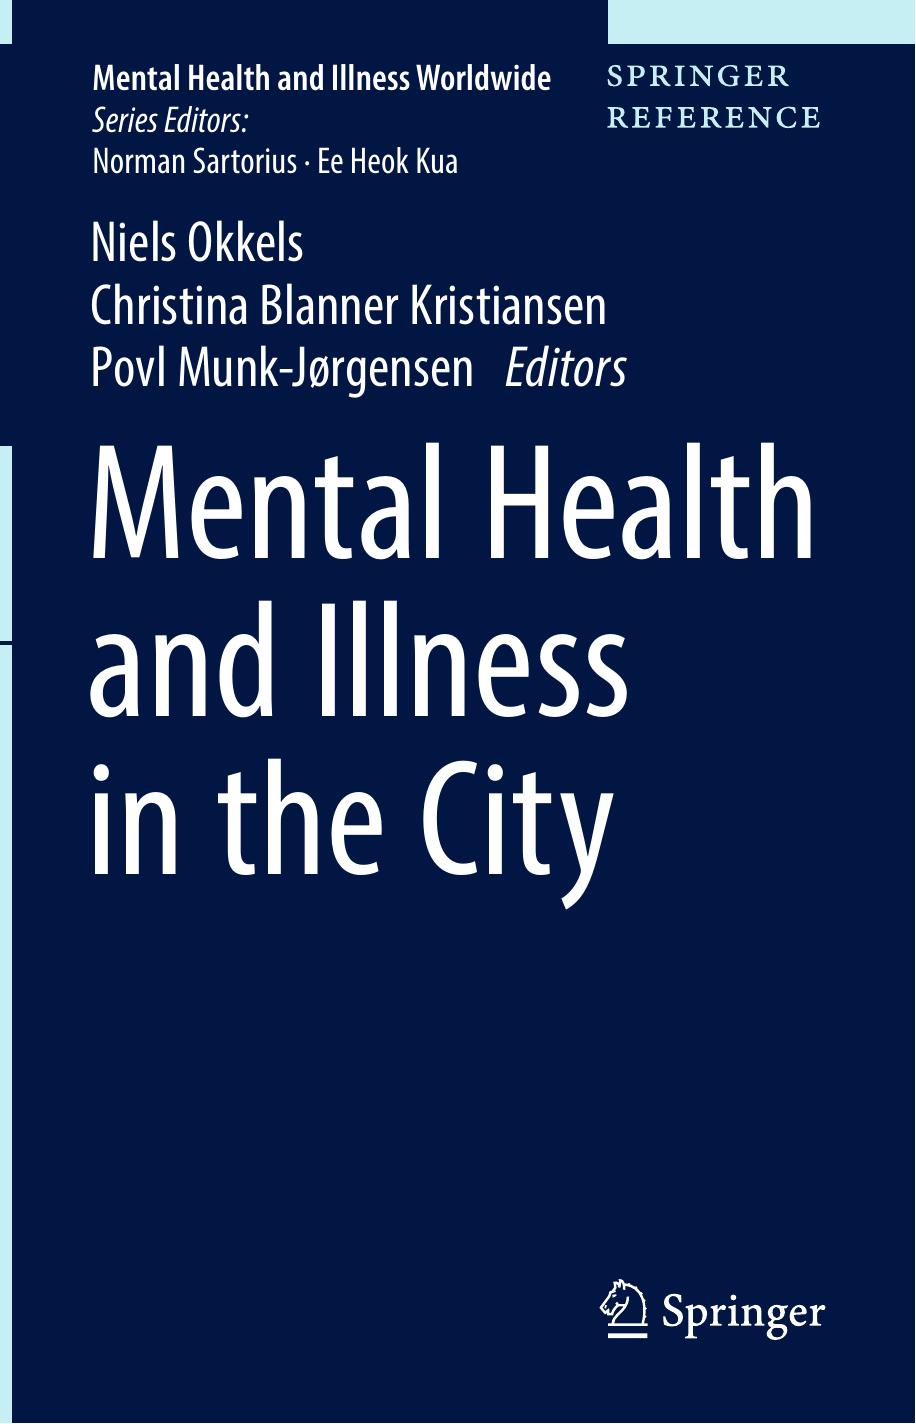 Mental Health and Illness in the City (2017)